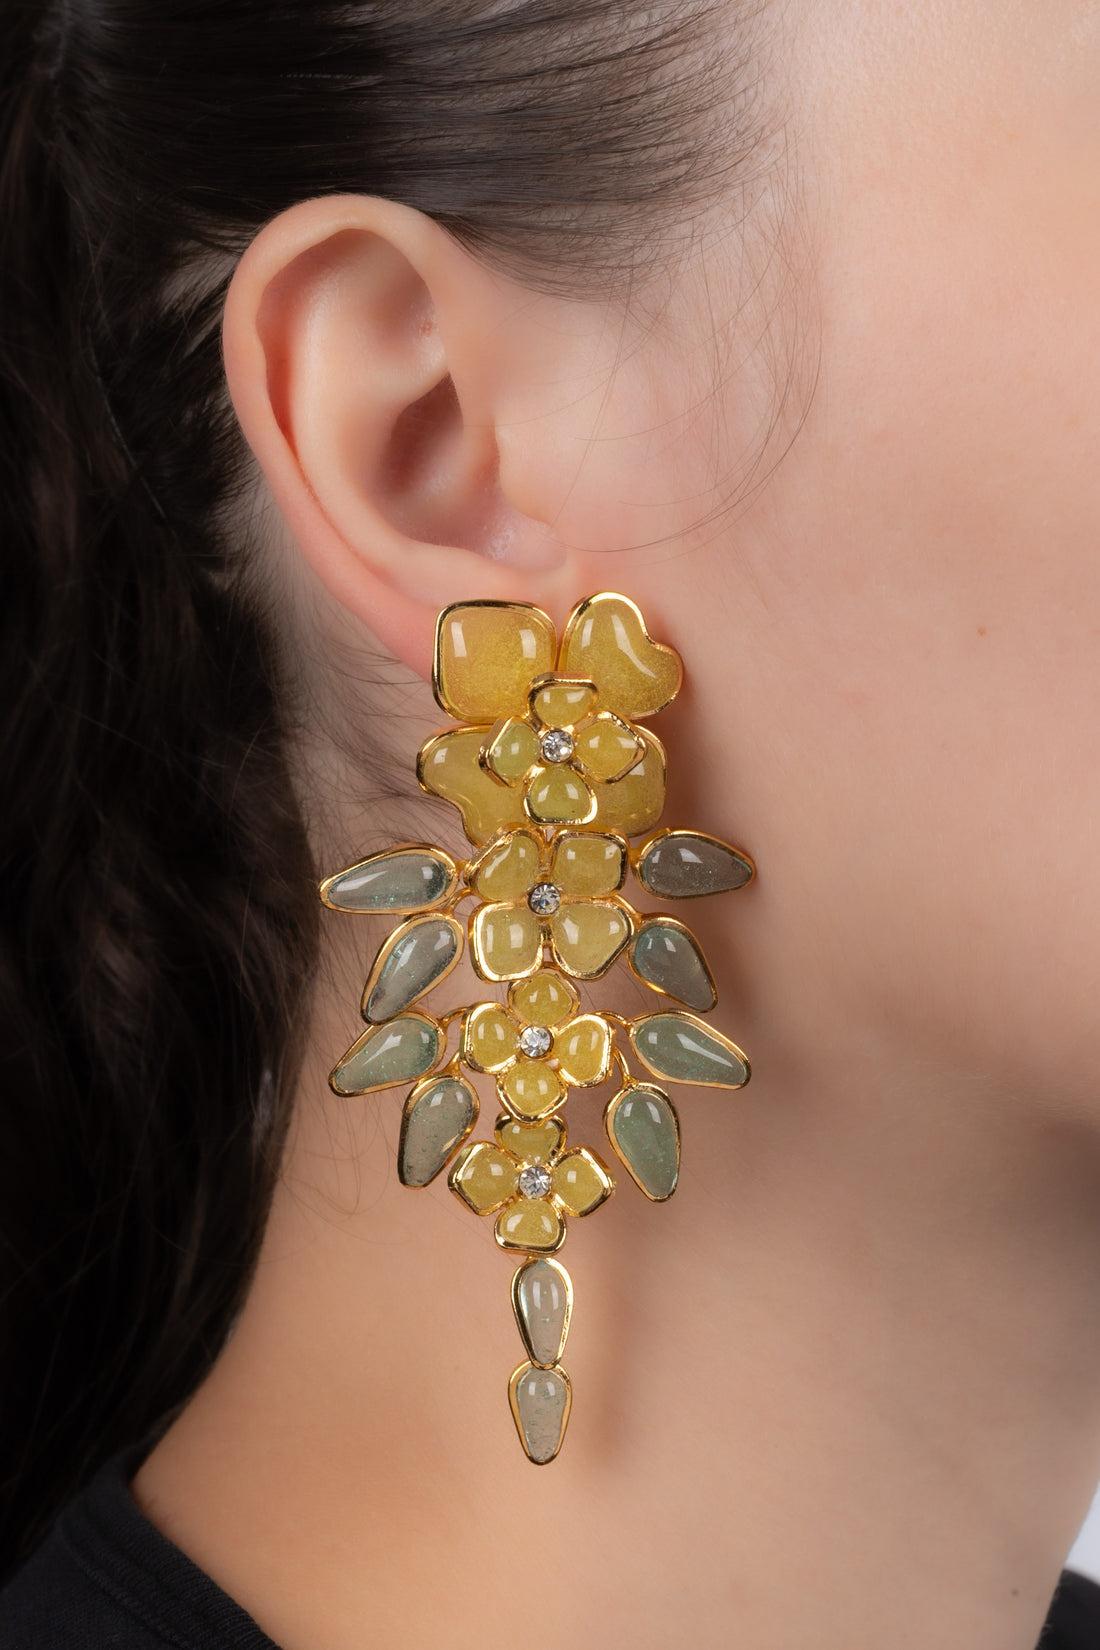 Augustine - Golden metal earrings with yellow glass paste.

Additional information:
Condition: Very good condition
Dimensions: Length: 9 cm

Seller Reference: BO305